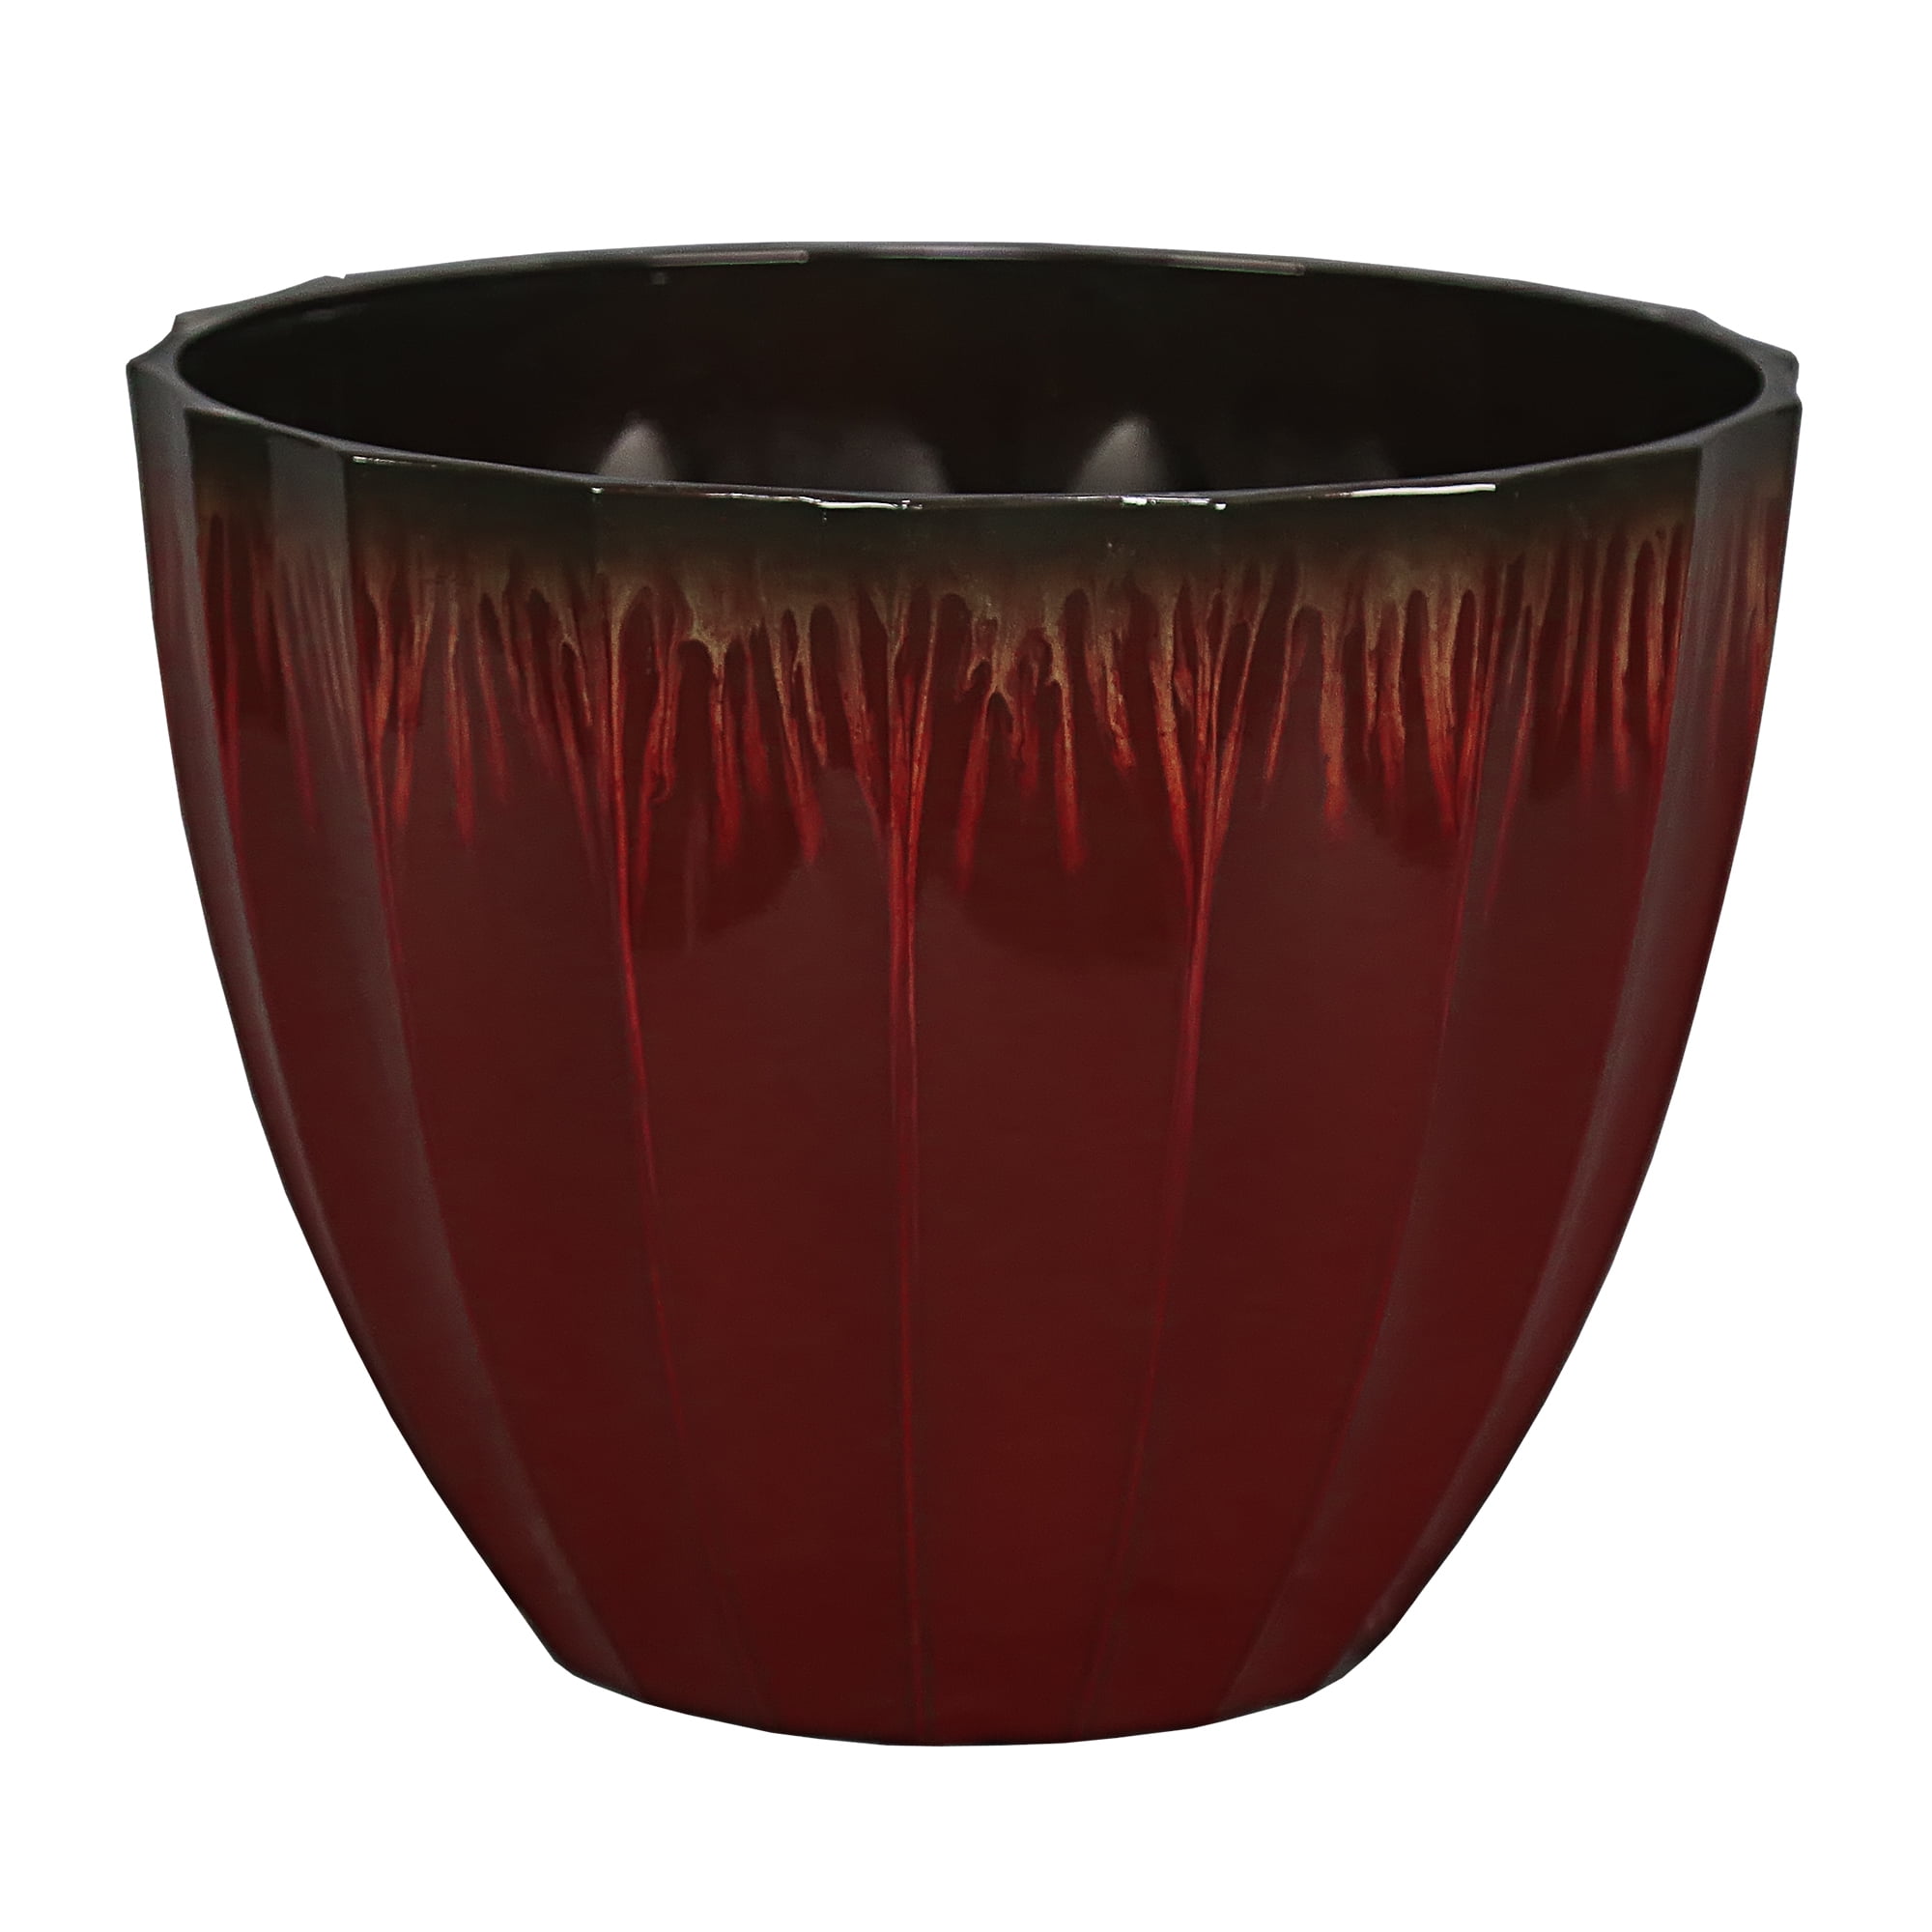 Better Homes & Gardens Andora Red Color Resin Planter, 15.9in x 15.9in x 12.6in